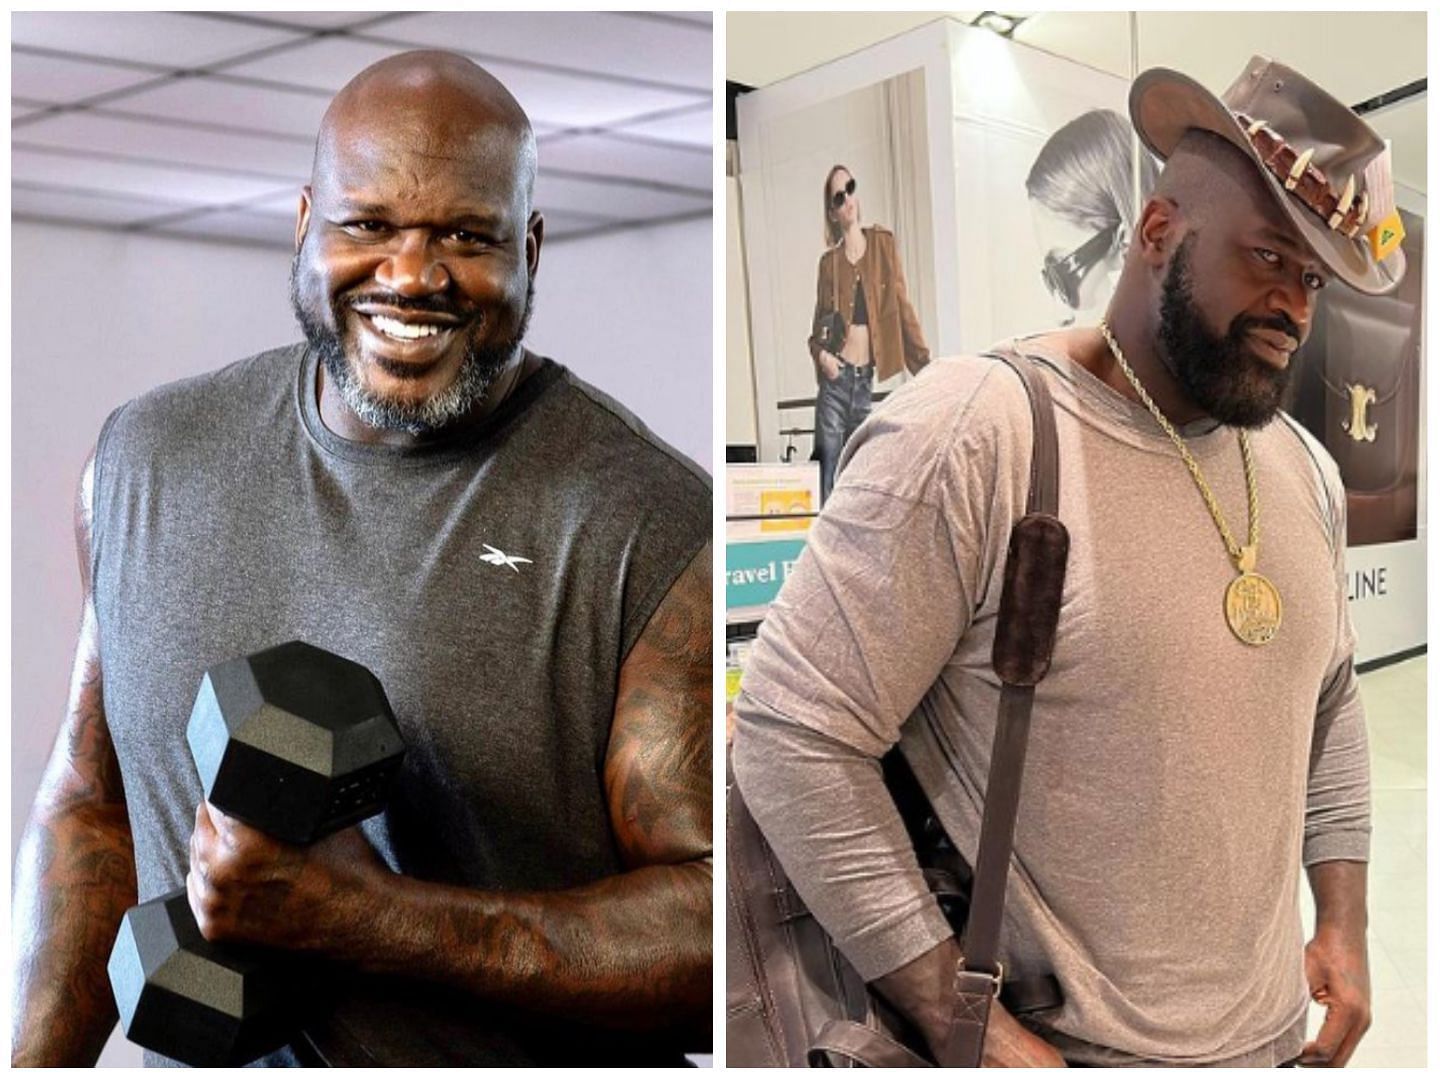 Shaquille oneal works out for an hour every day and trains cardio and weights for about an hour. (Image via Instagram @shaq /@ot.storieaspichhi)